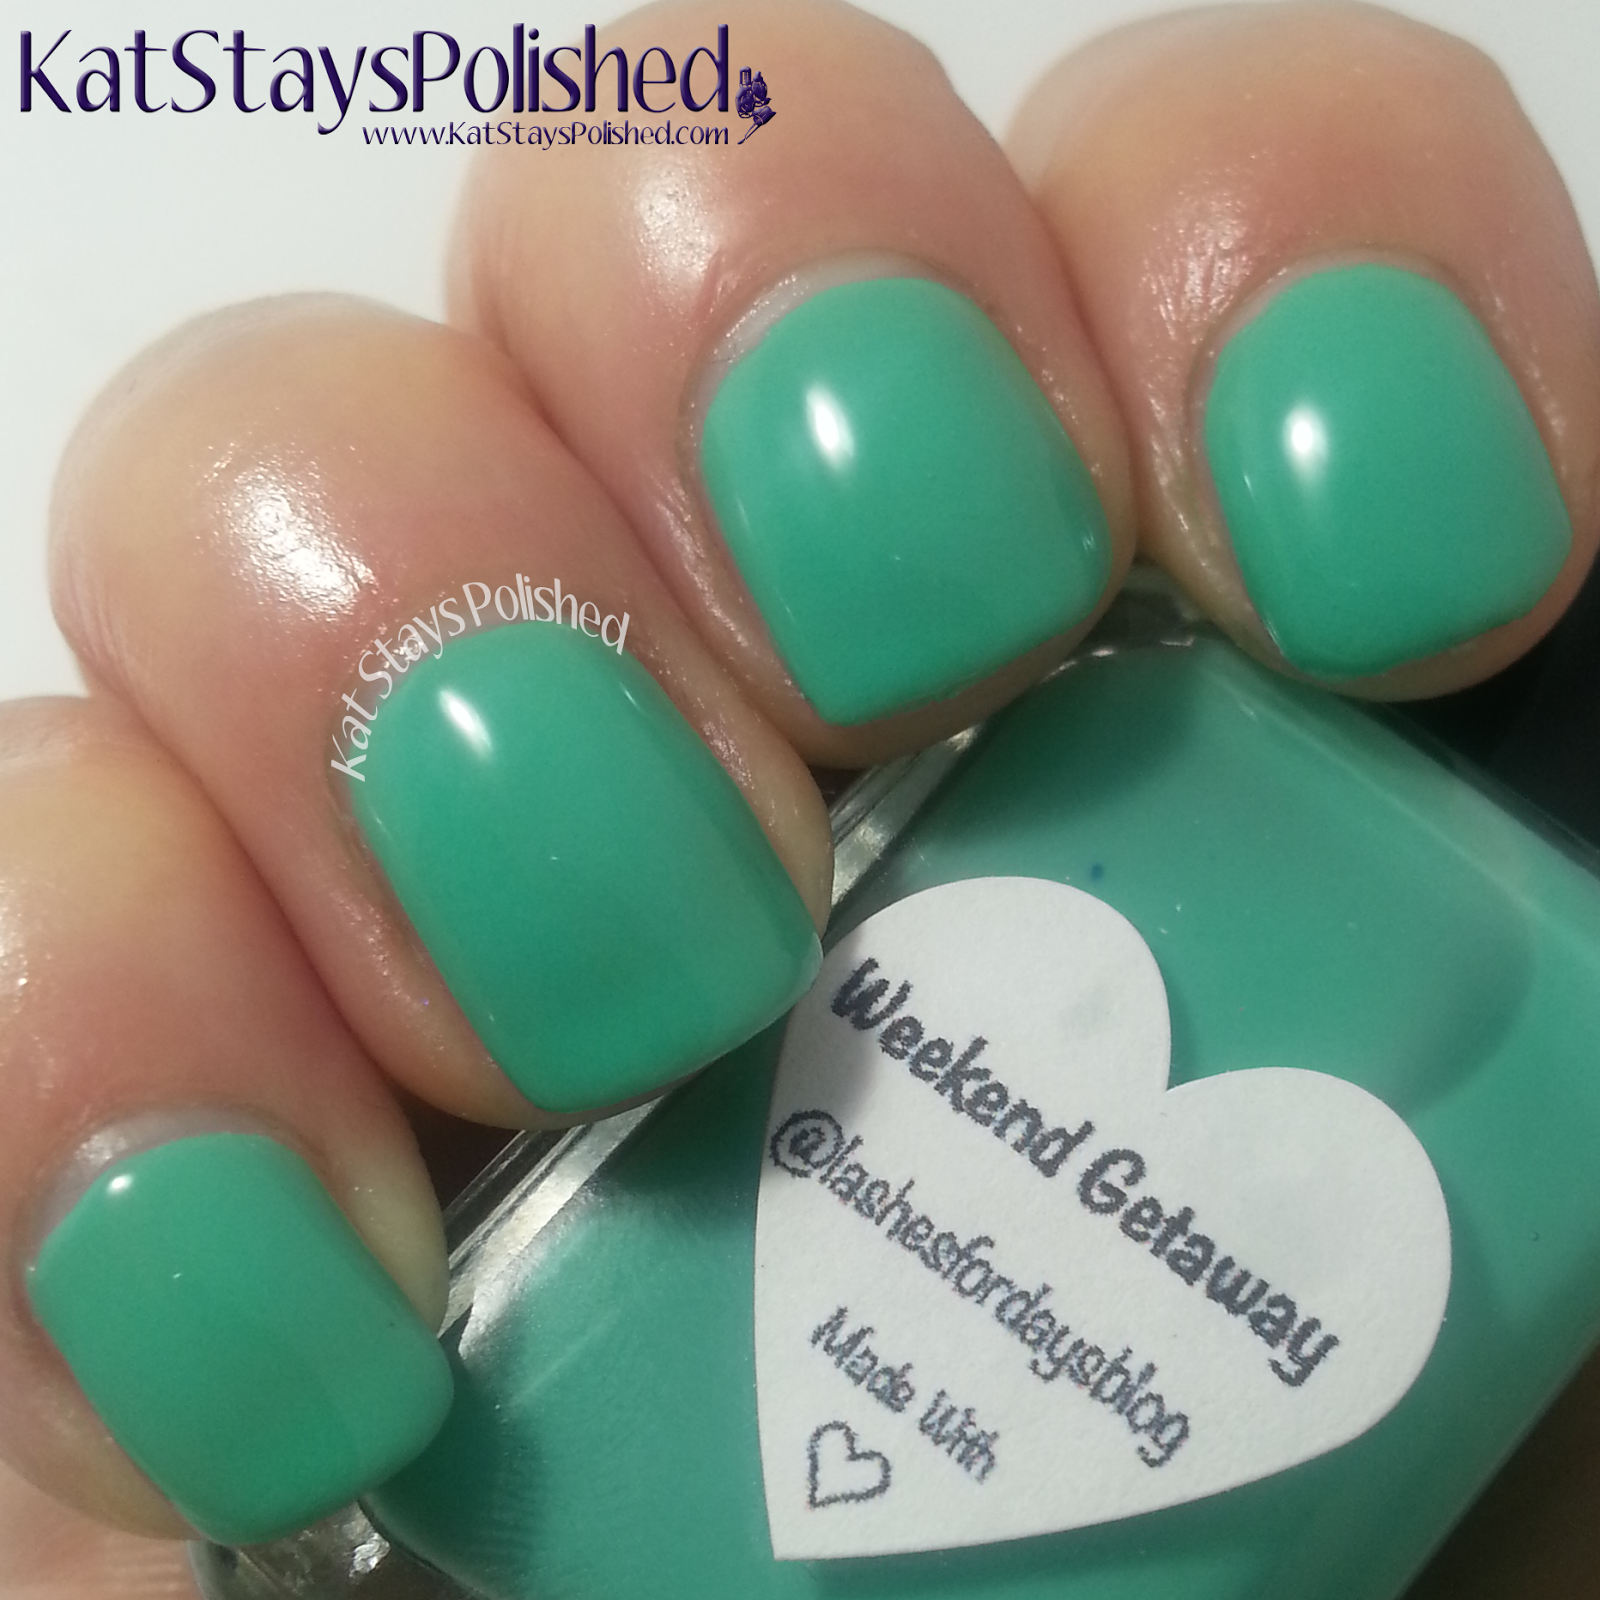 Polished for For Days - Gloss48 - Weekend Getaway | Kat Stays Polished